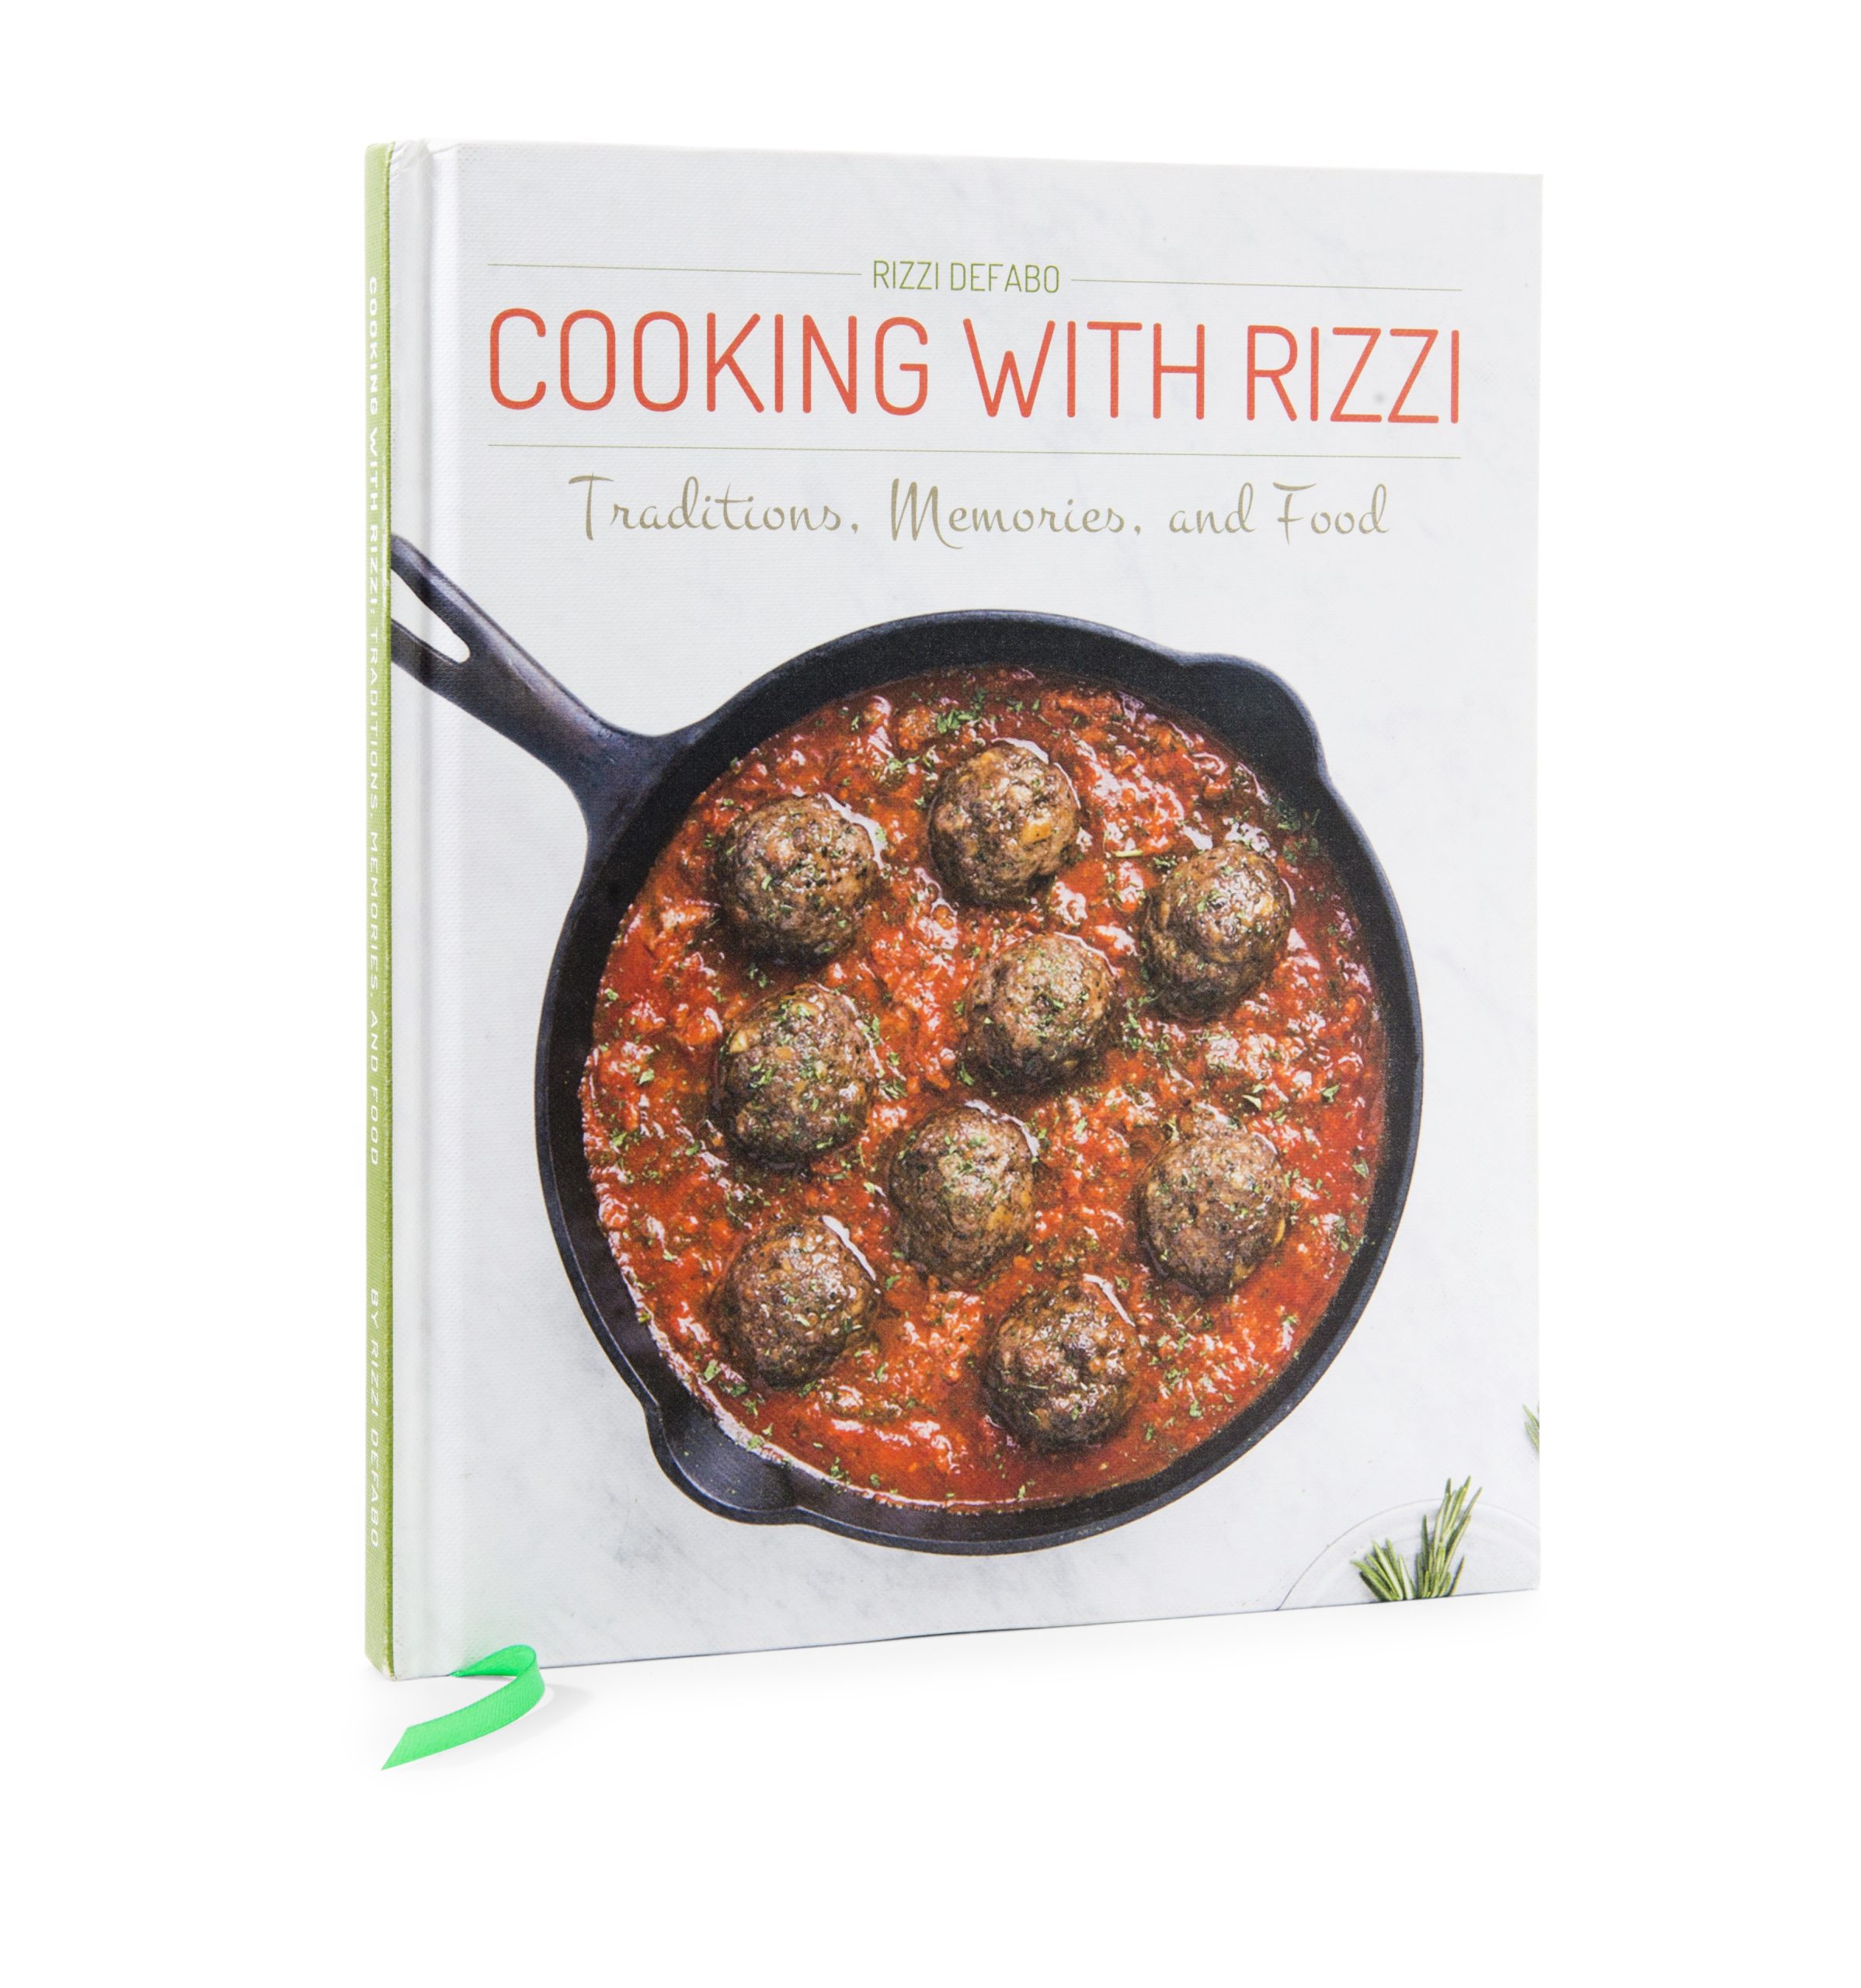 Cooking with Rizzi: Traditions, Memories, and Food